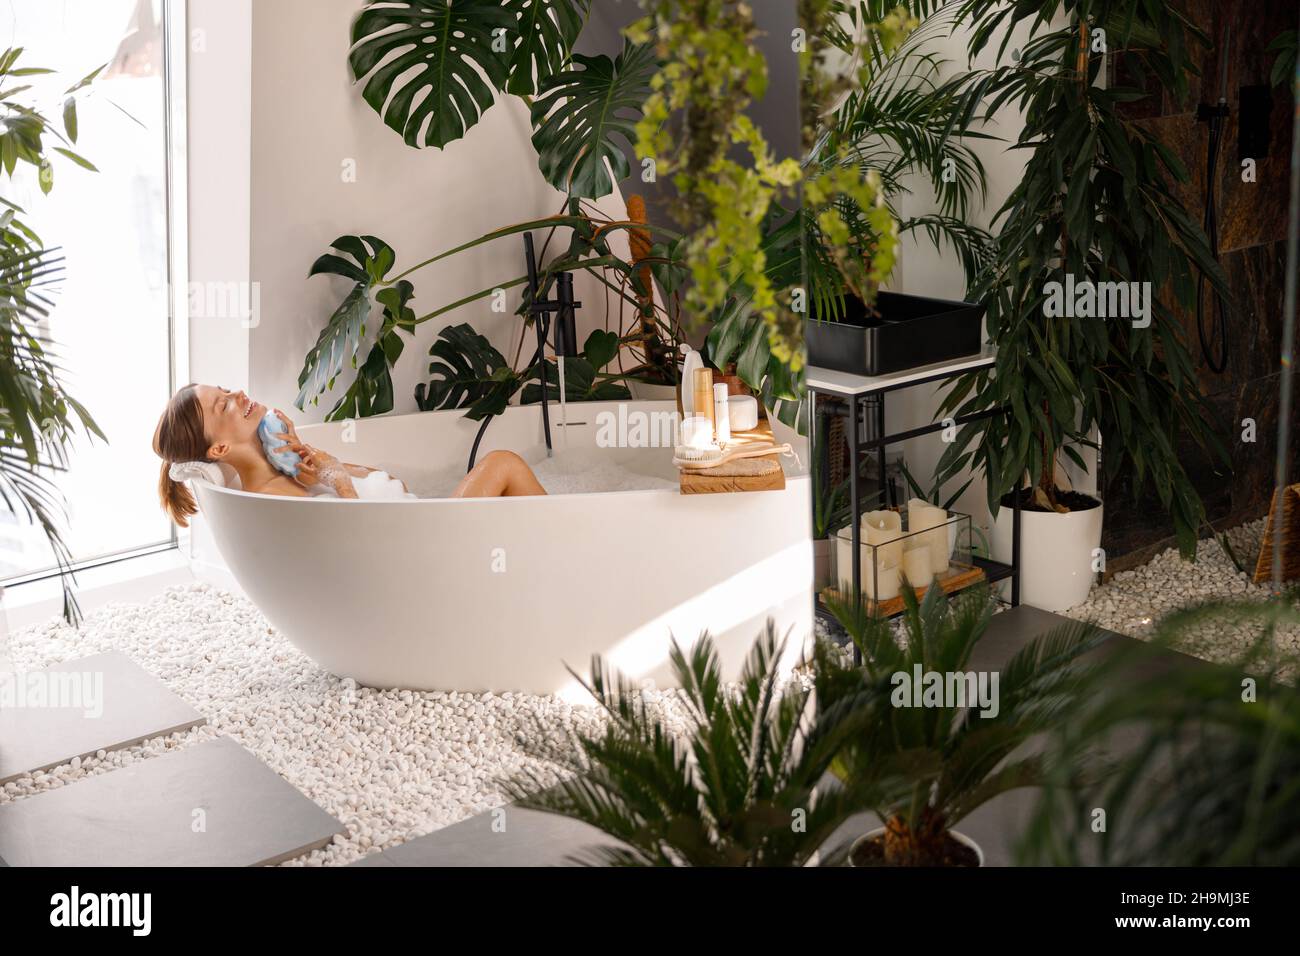 Relaxed young woman bathing in modern bathroom interior decorated with tropical plants Stock Photo